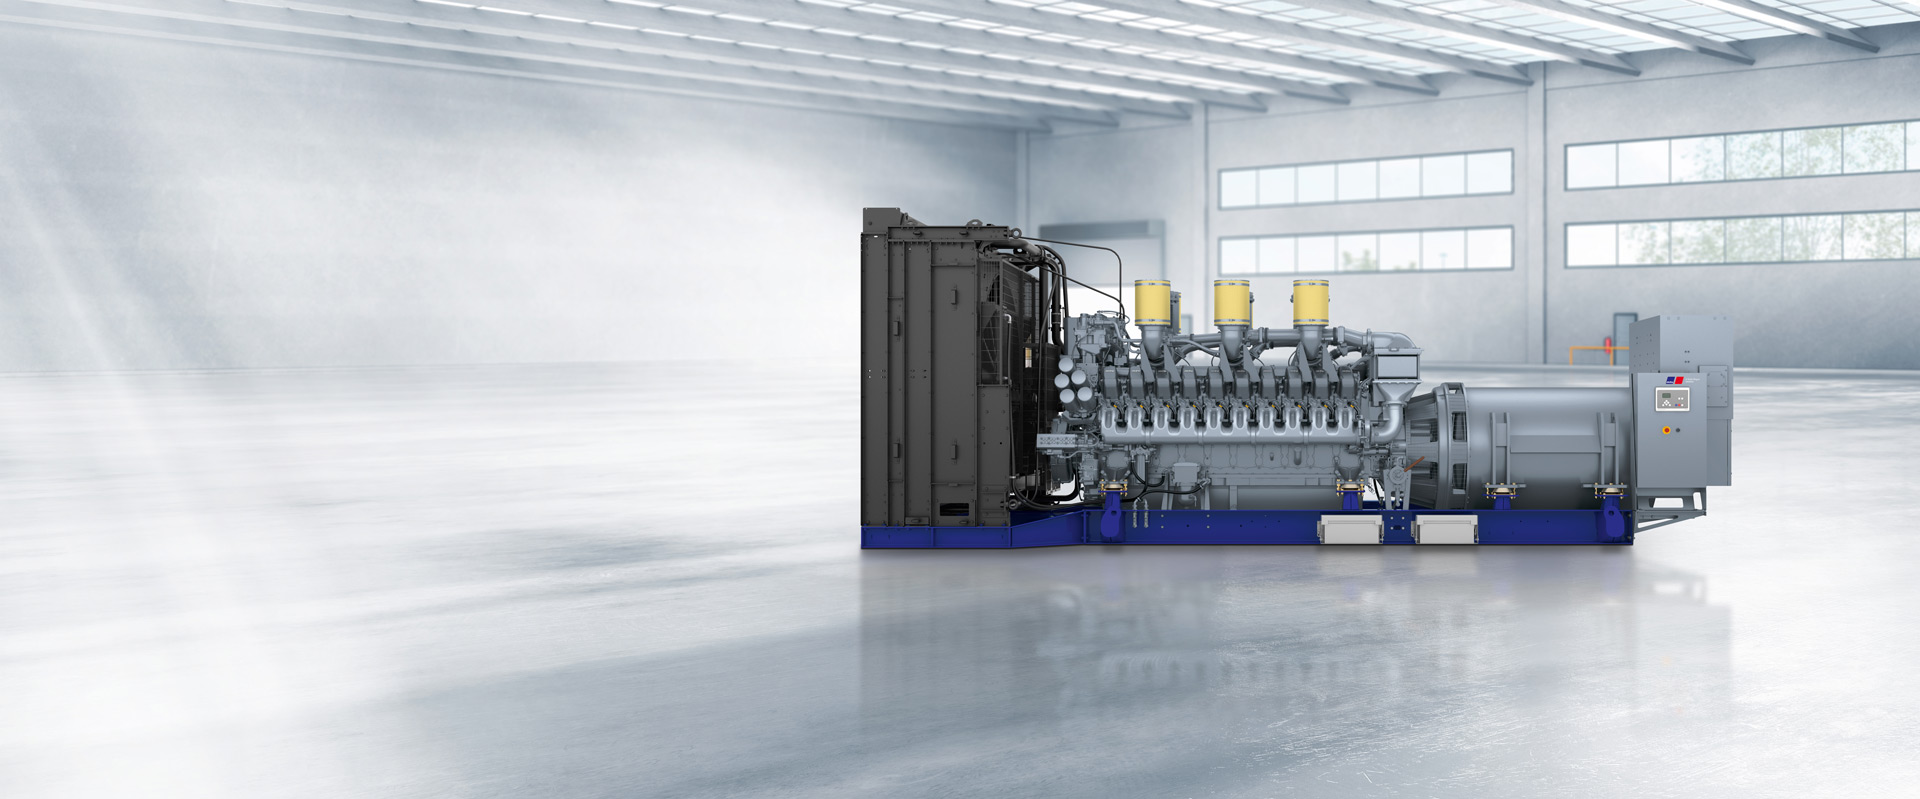 Diesel Generators: Why They Are the Top Choice for Power Backup